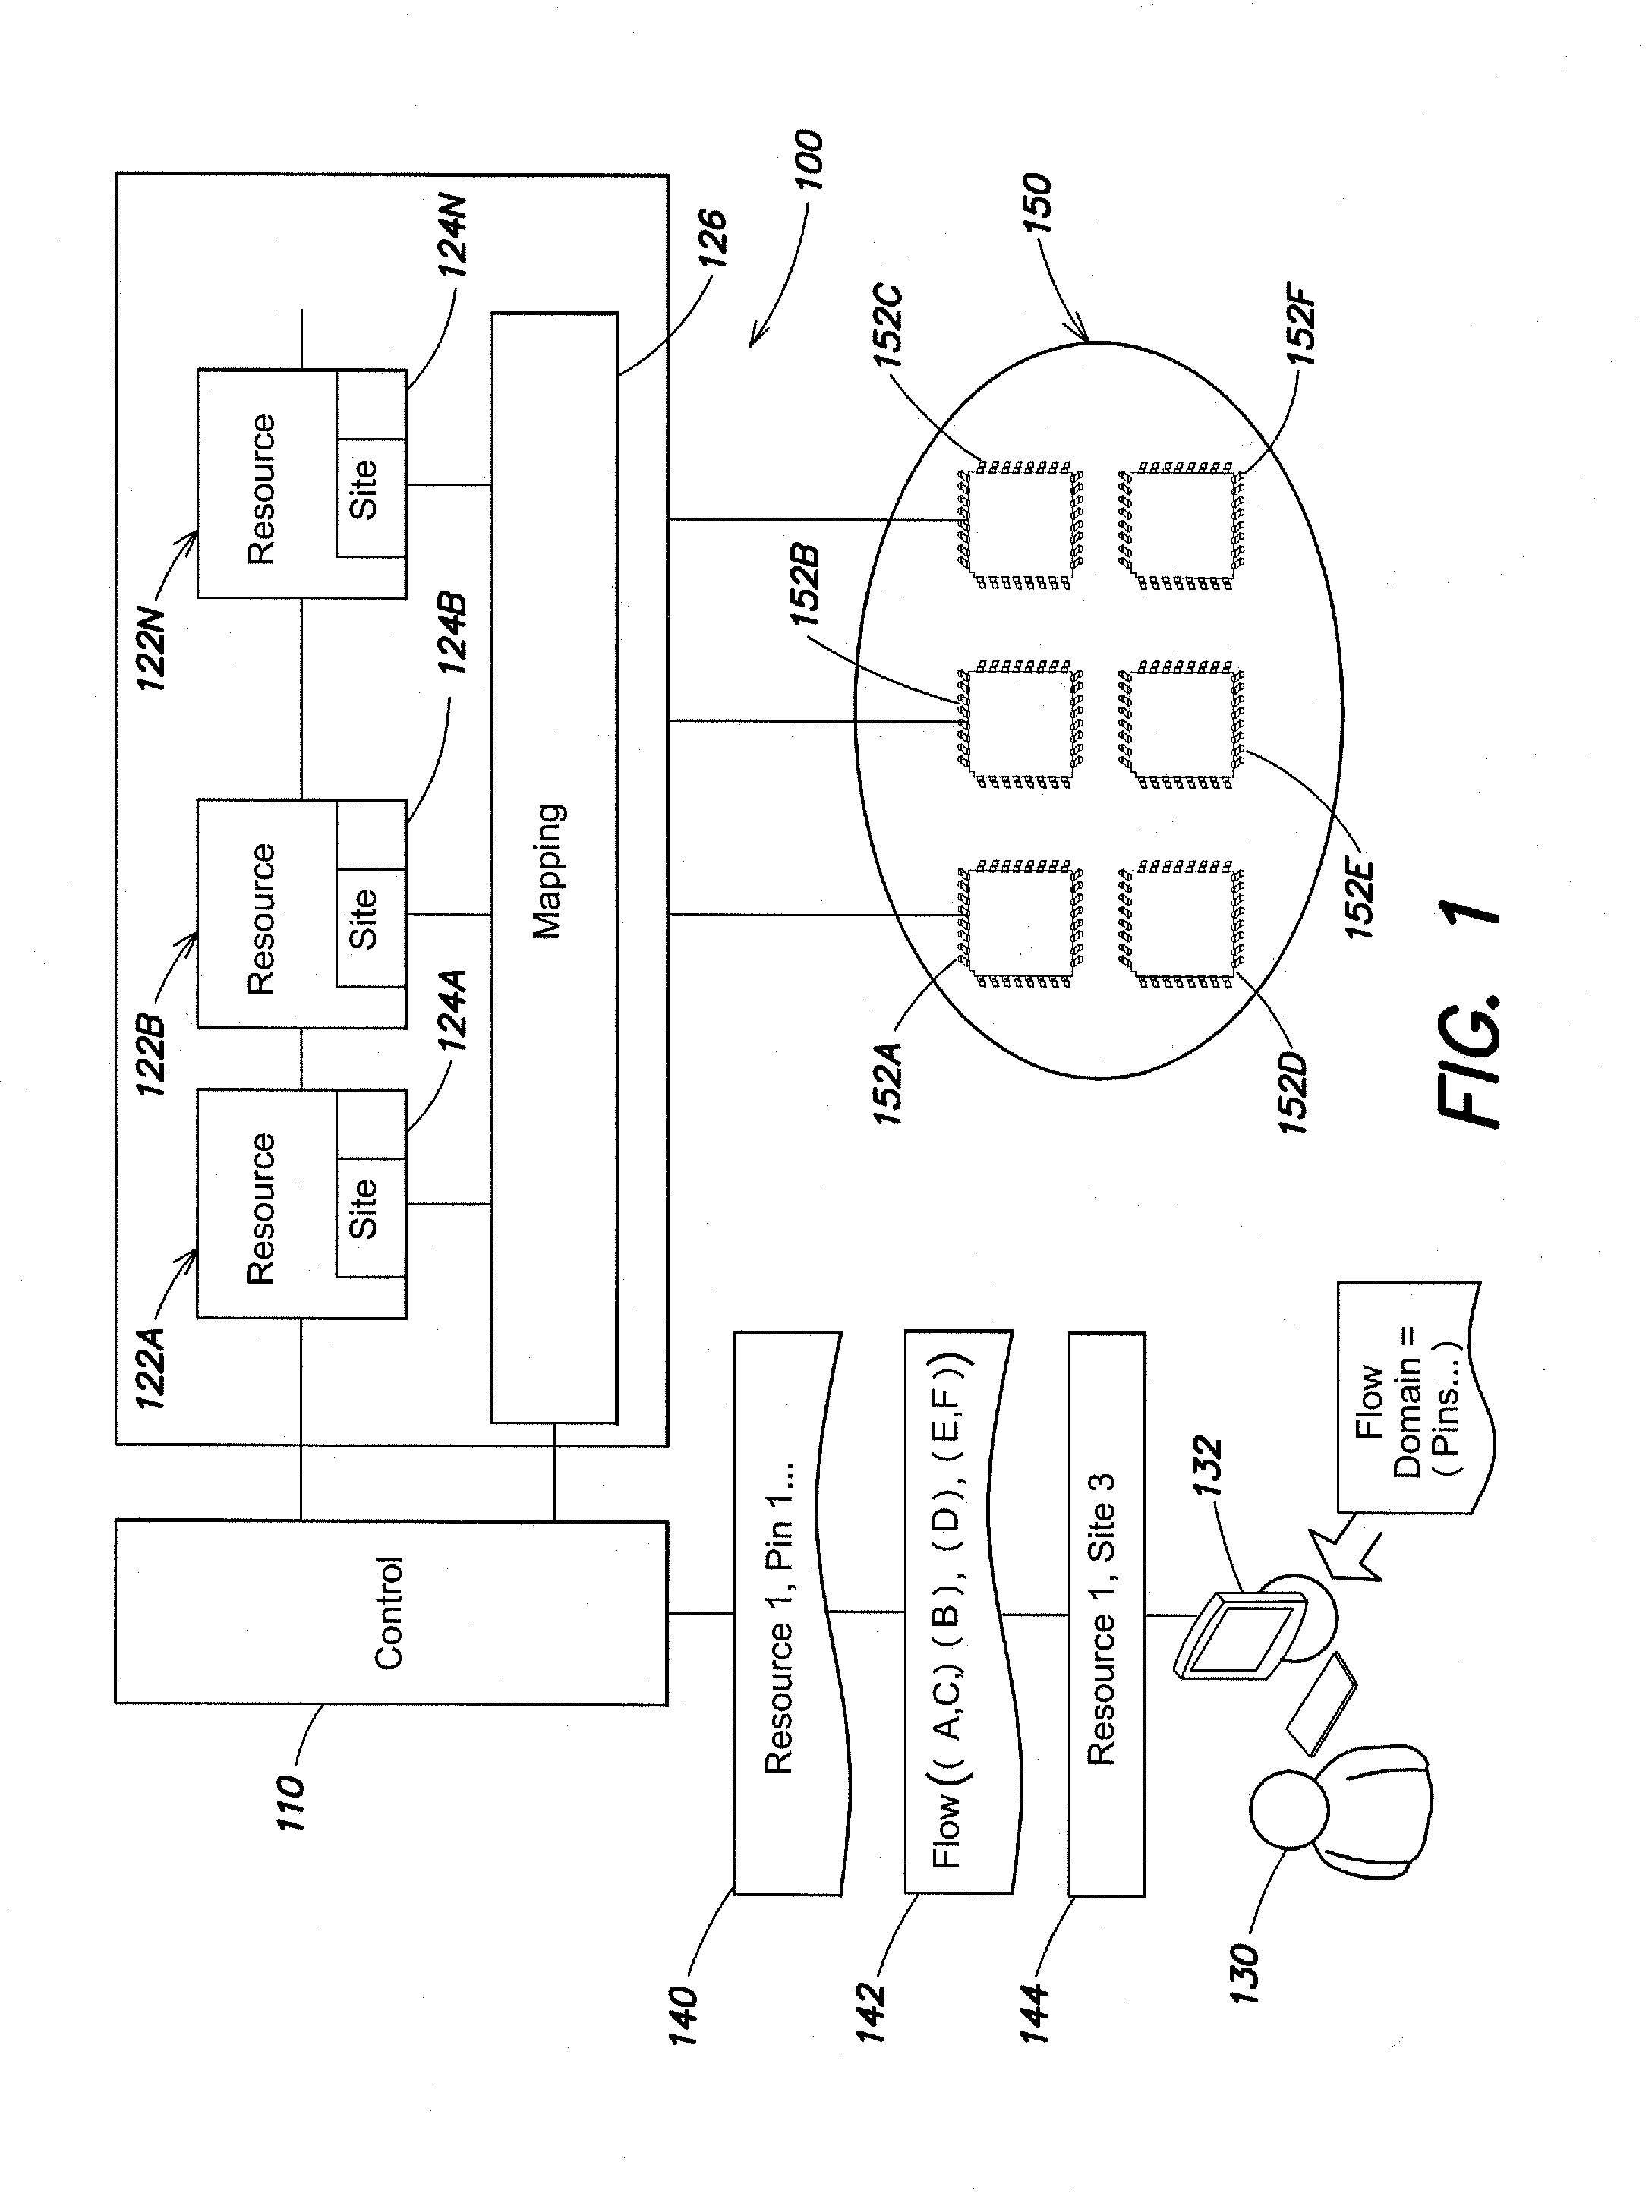 Test system supporting simplified configuration for controlling test block concurrency